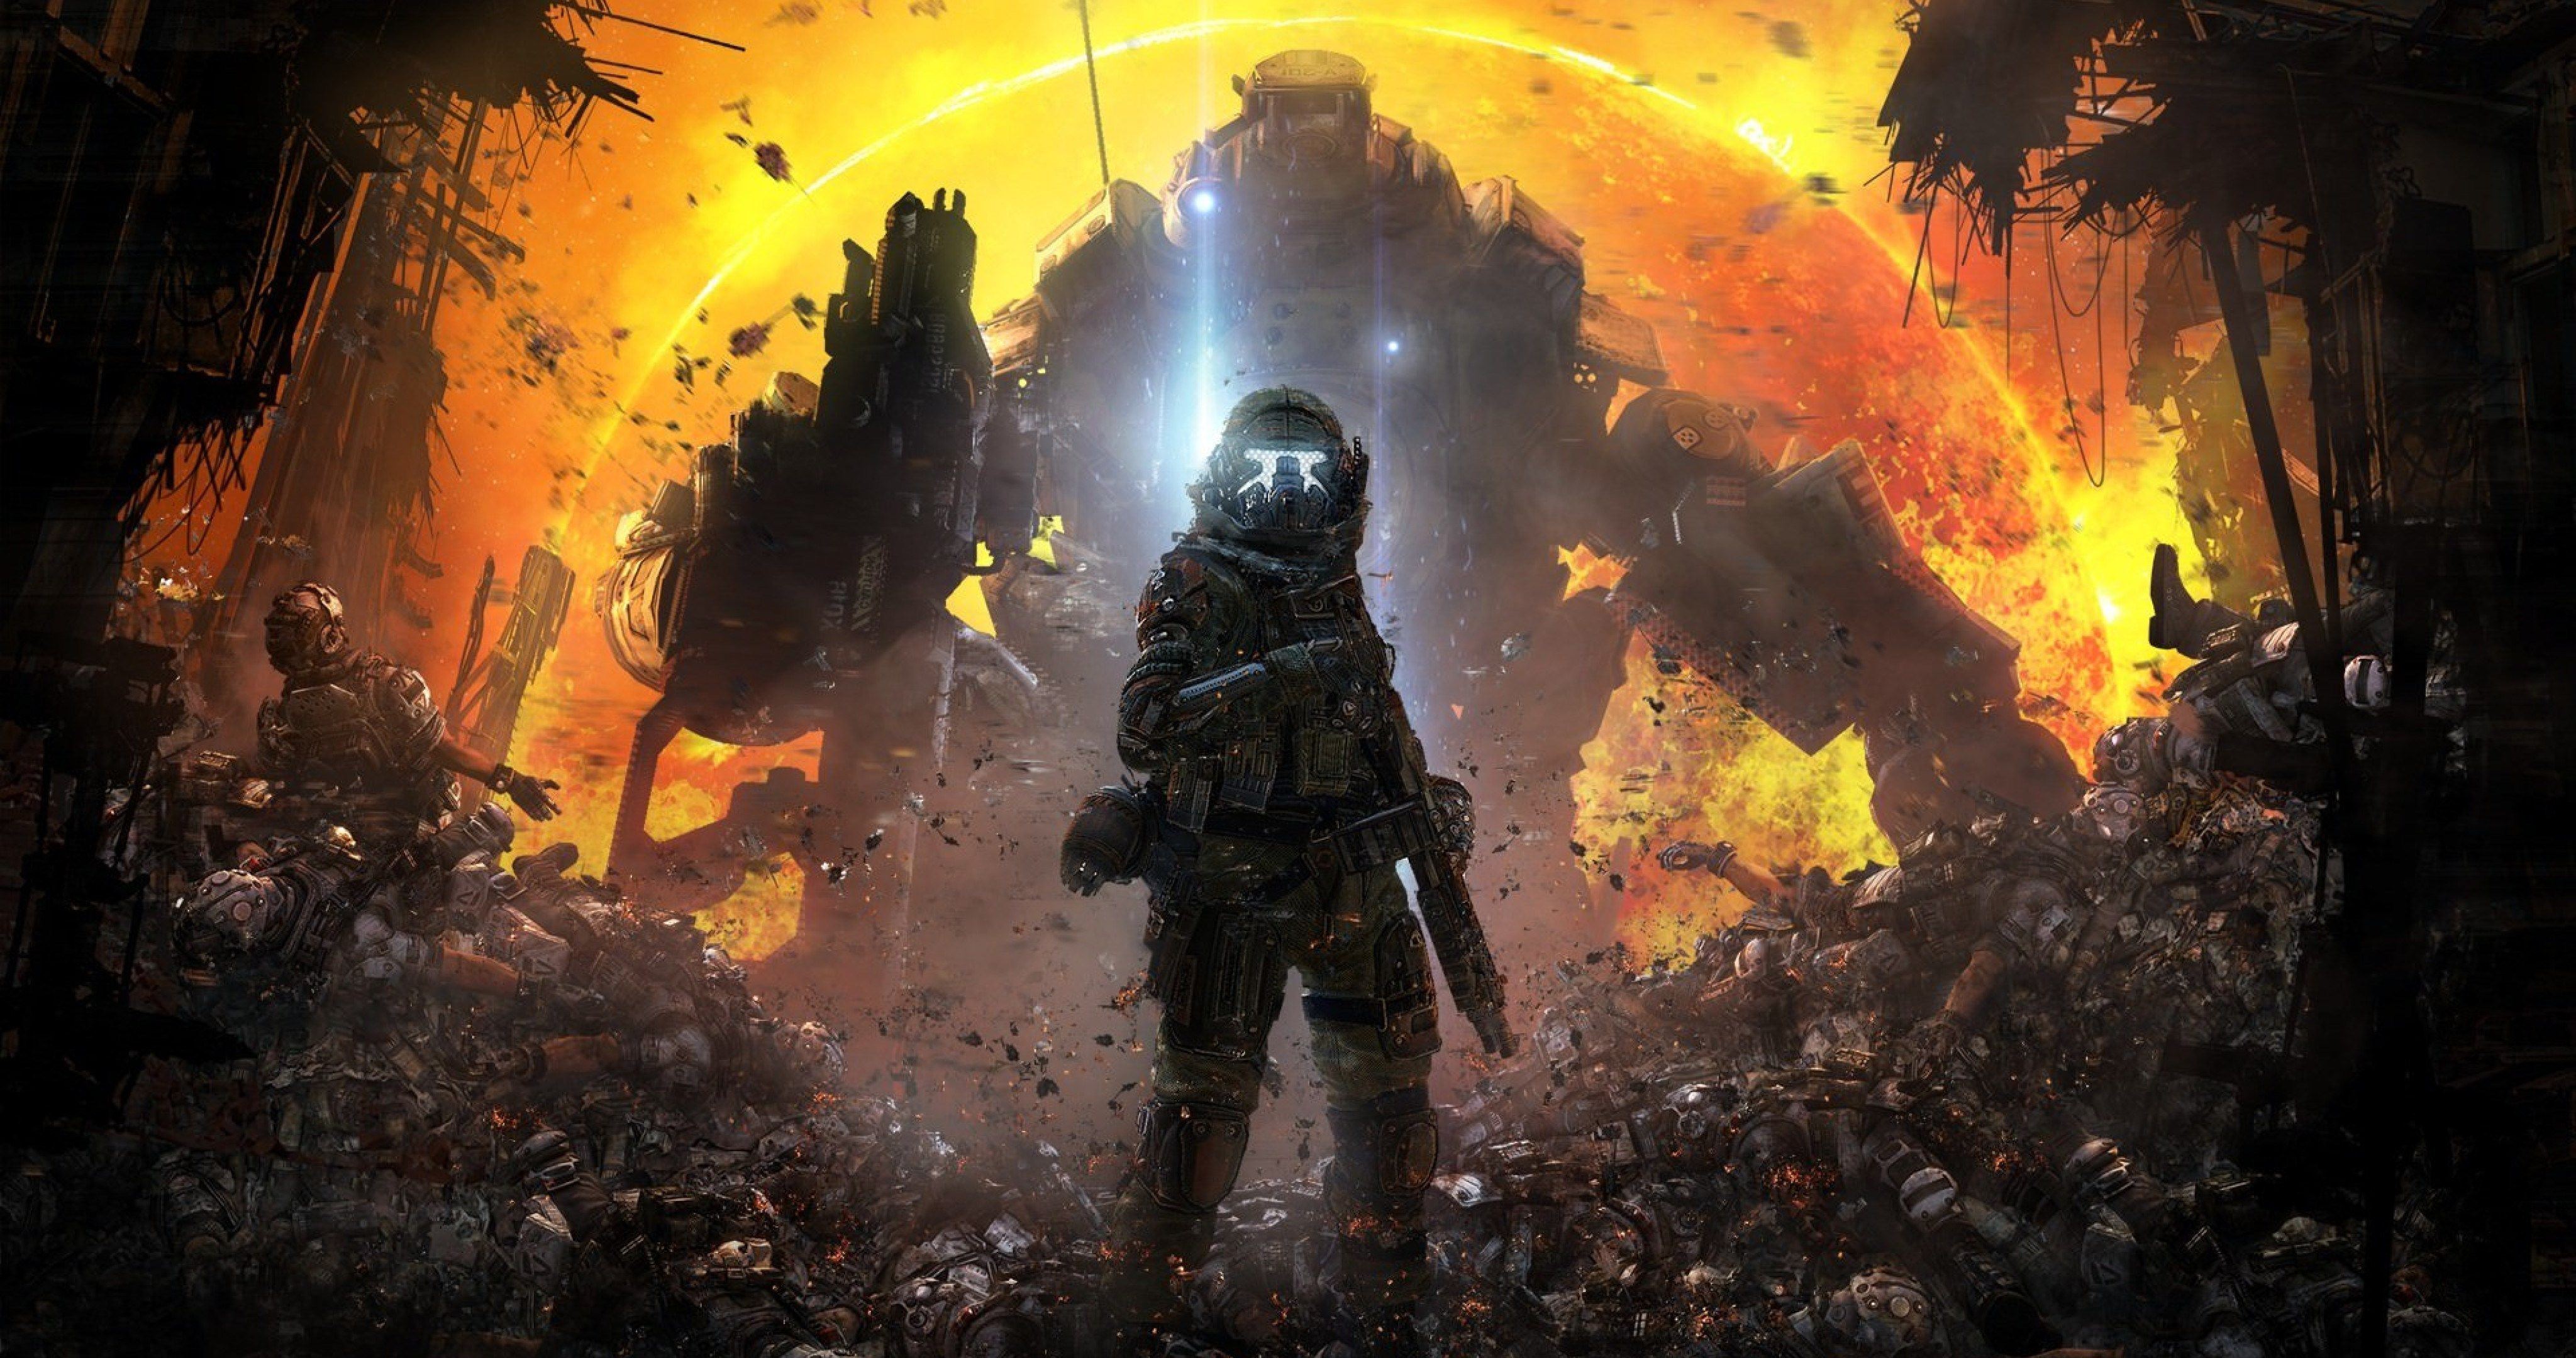 titanfall game wallpapers 4k ultra hd wallpapers » High quality walls